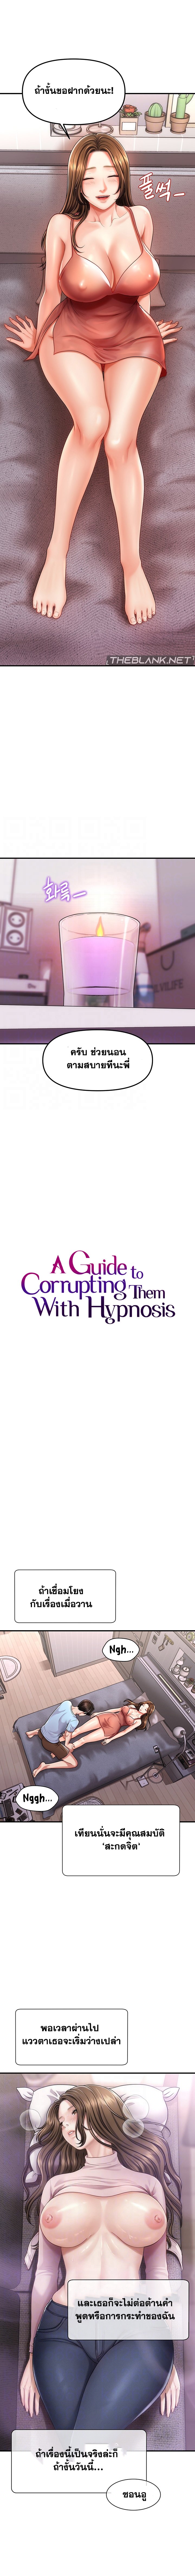 A Guide to Corrupting Them With Hypnosis 3 02